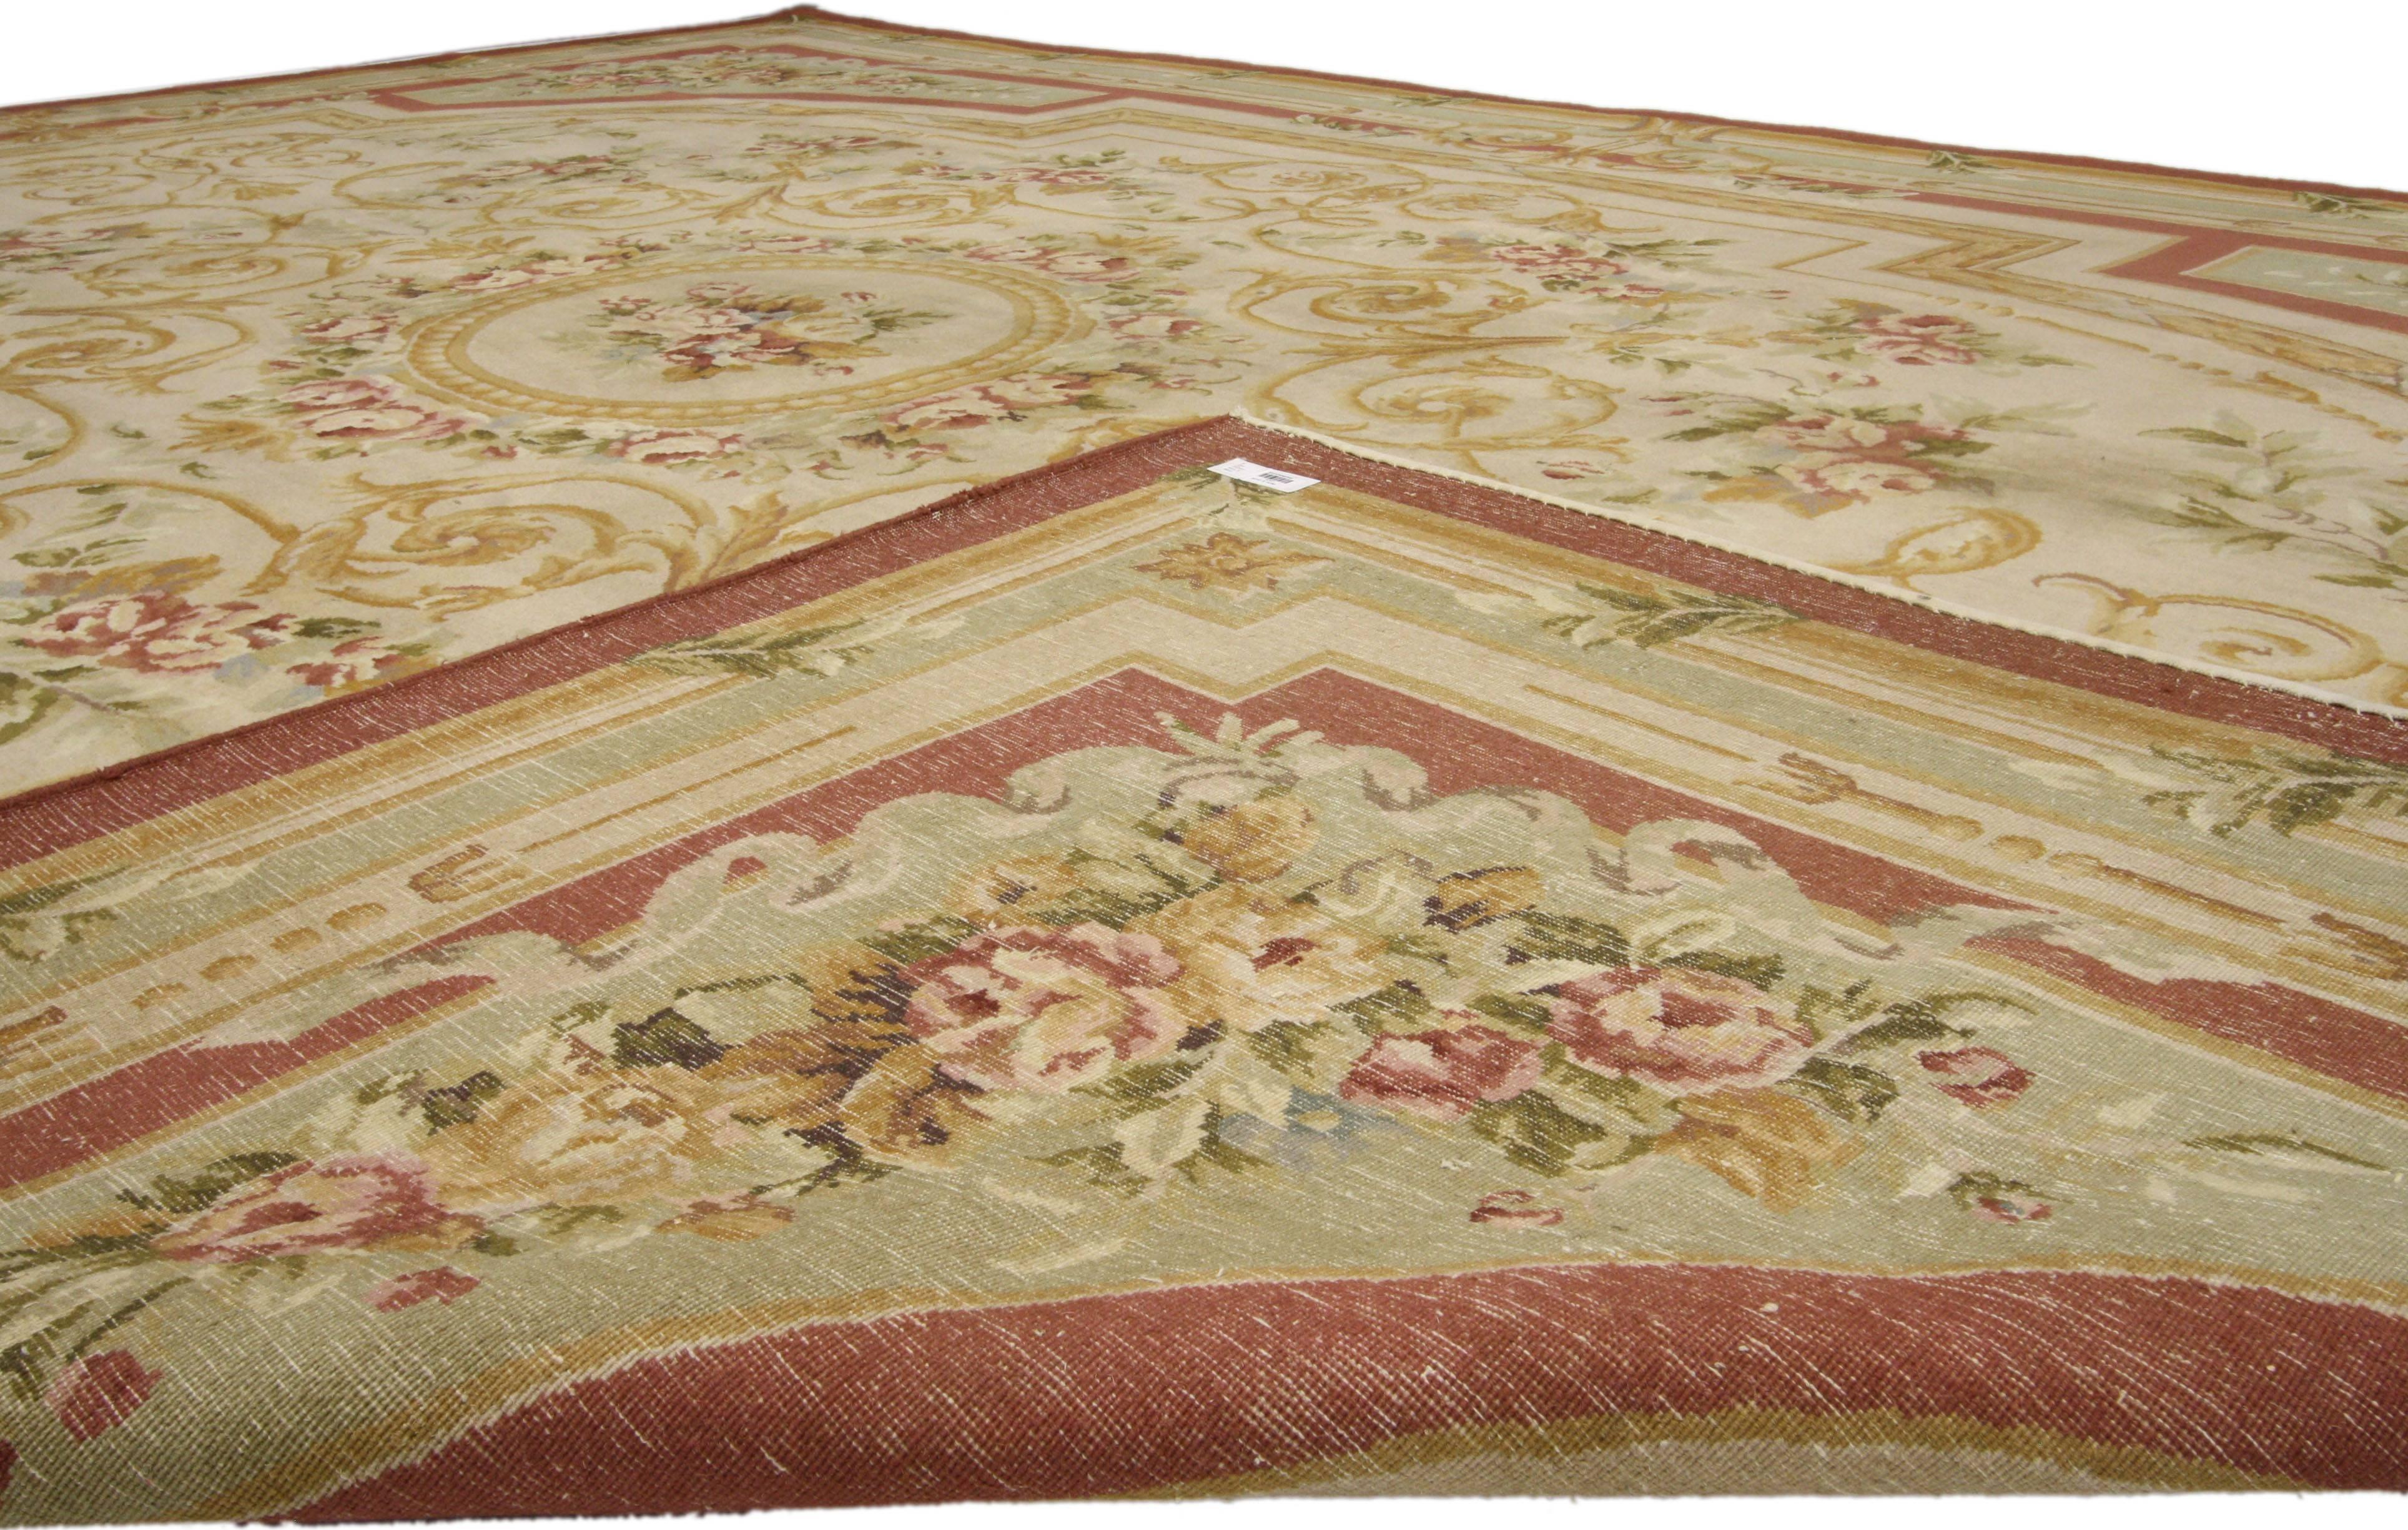 Chinese Vintage Savonnerie Style Area Rug, Aubusson Design Rug